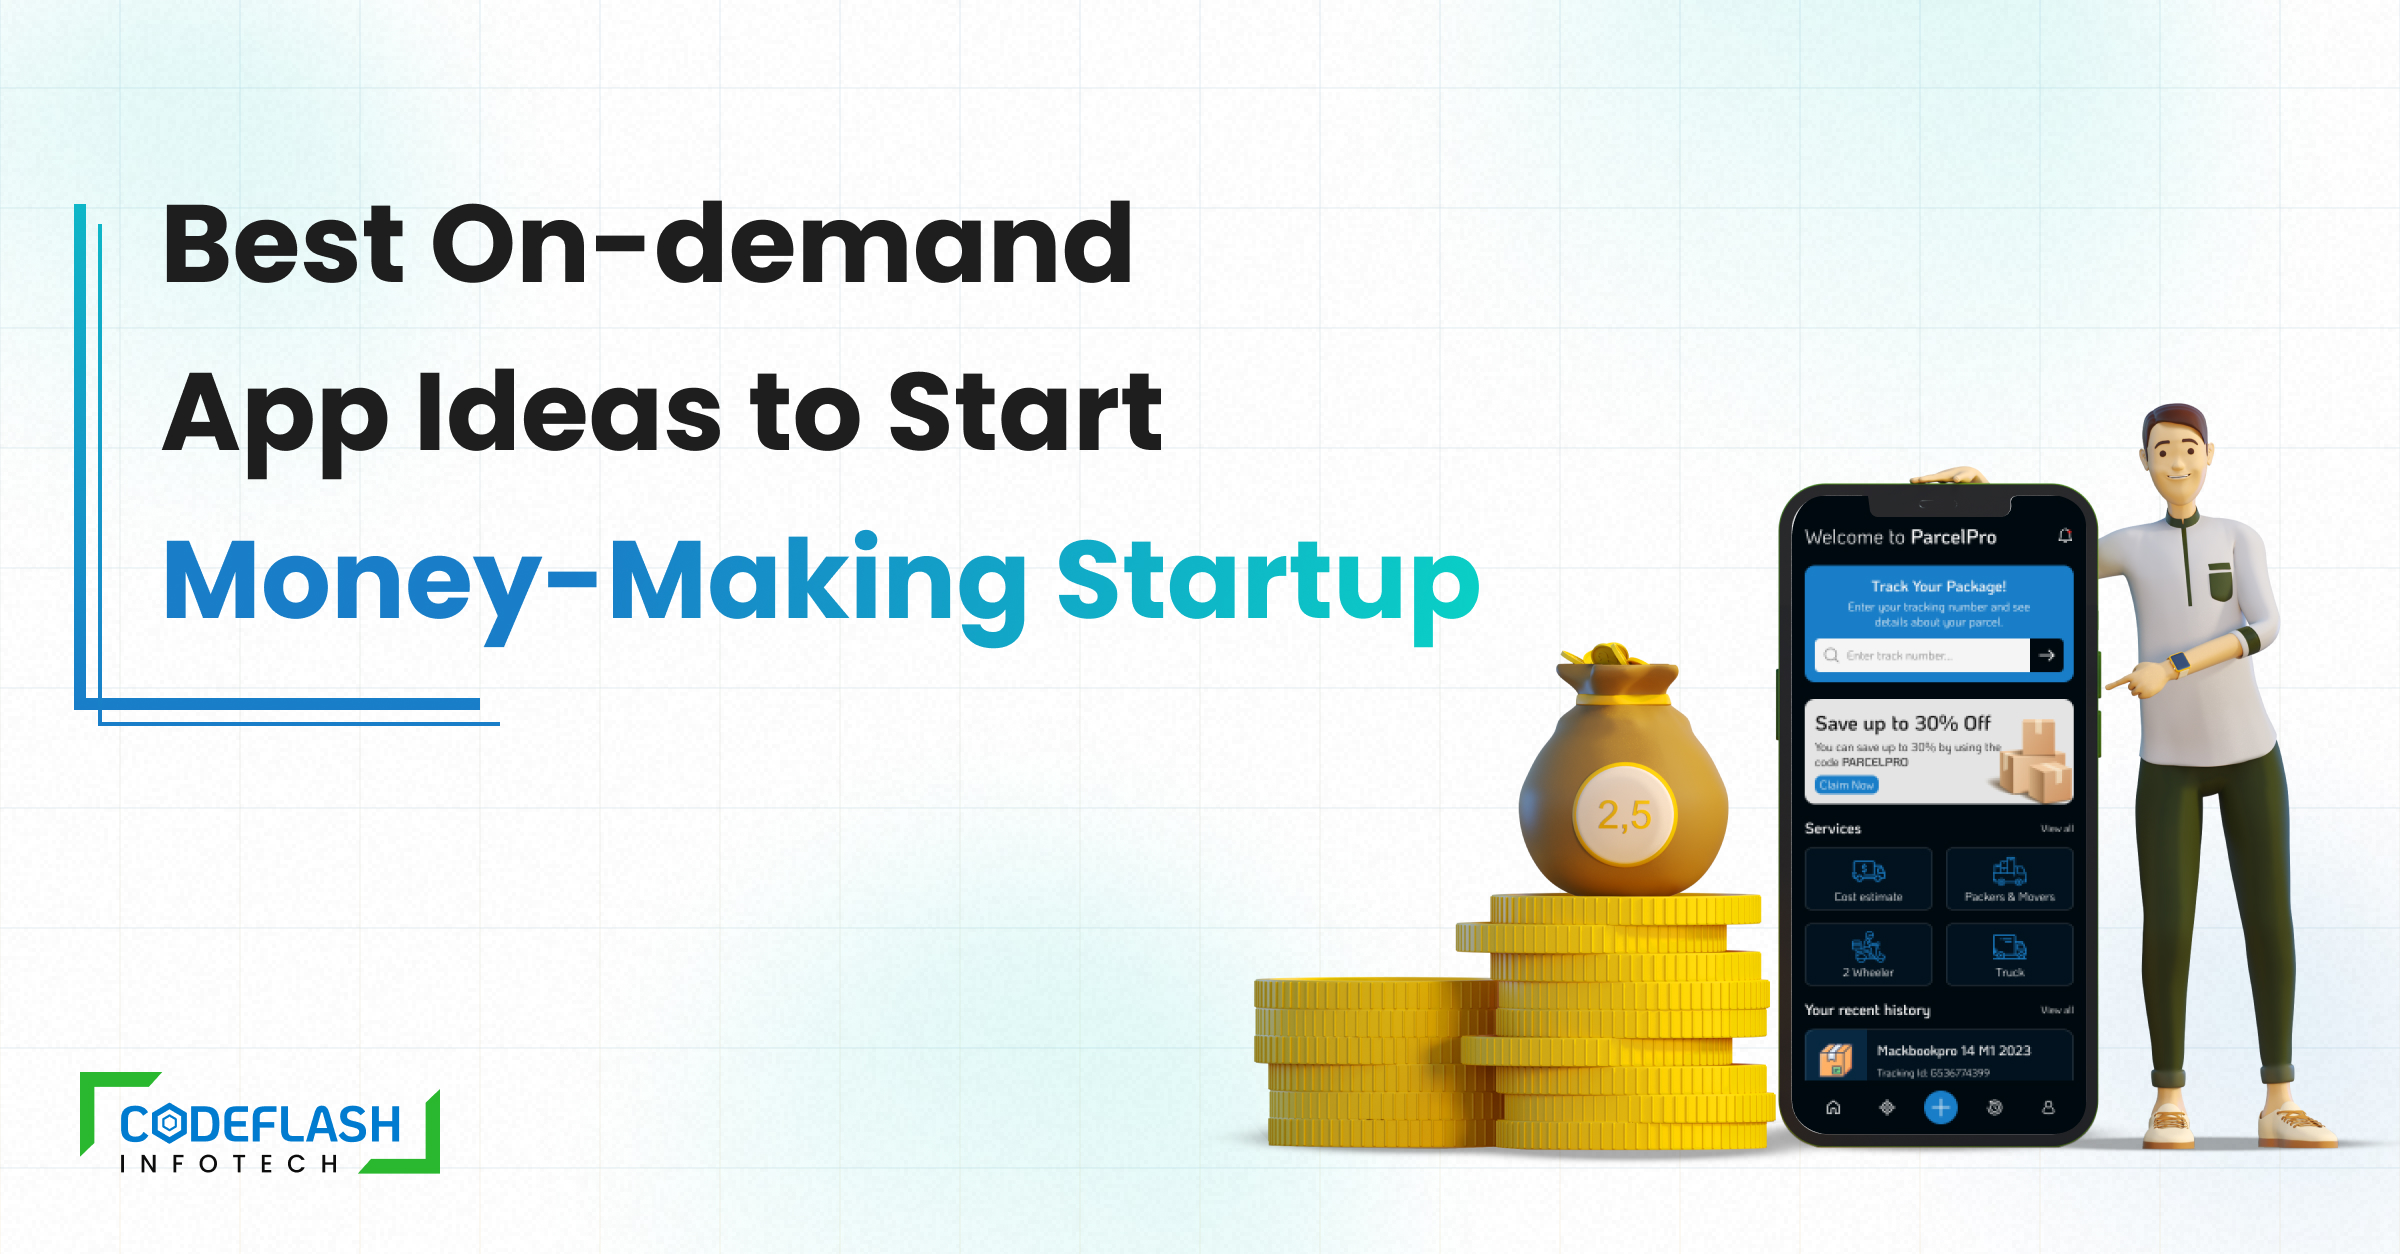 Best Web App Ideas To Make Money In 2024 - Application Startup Guide